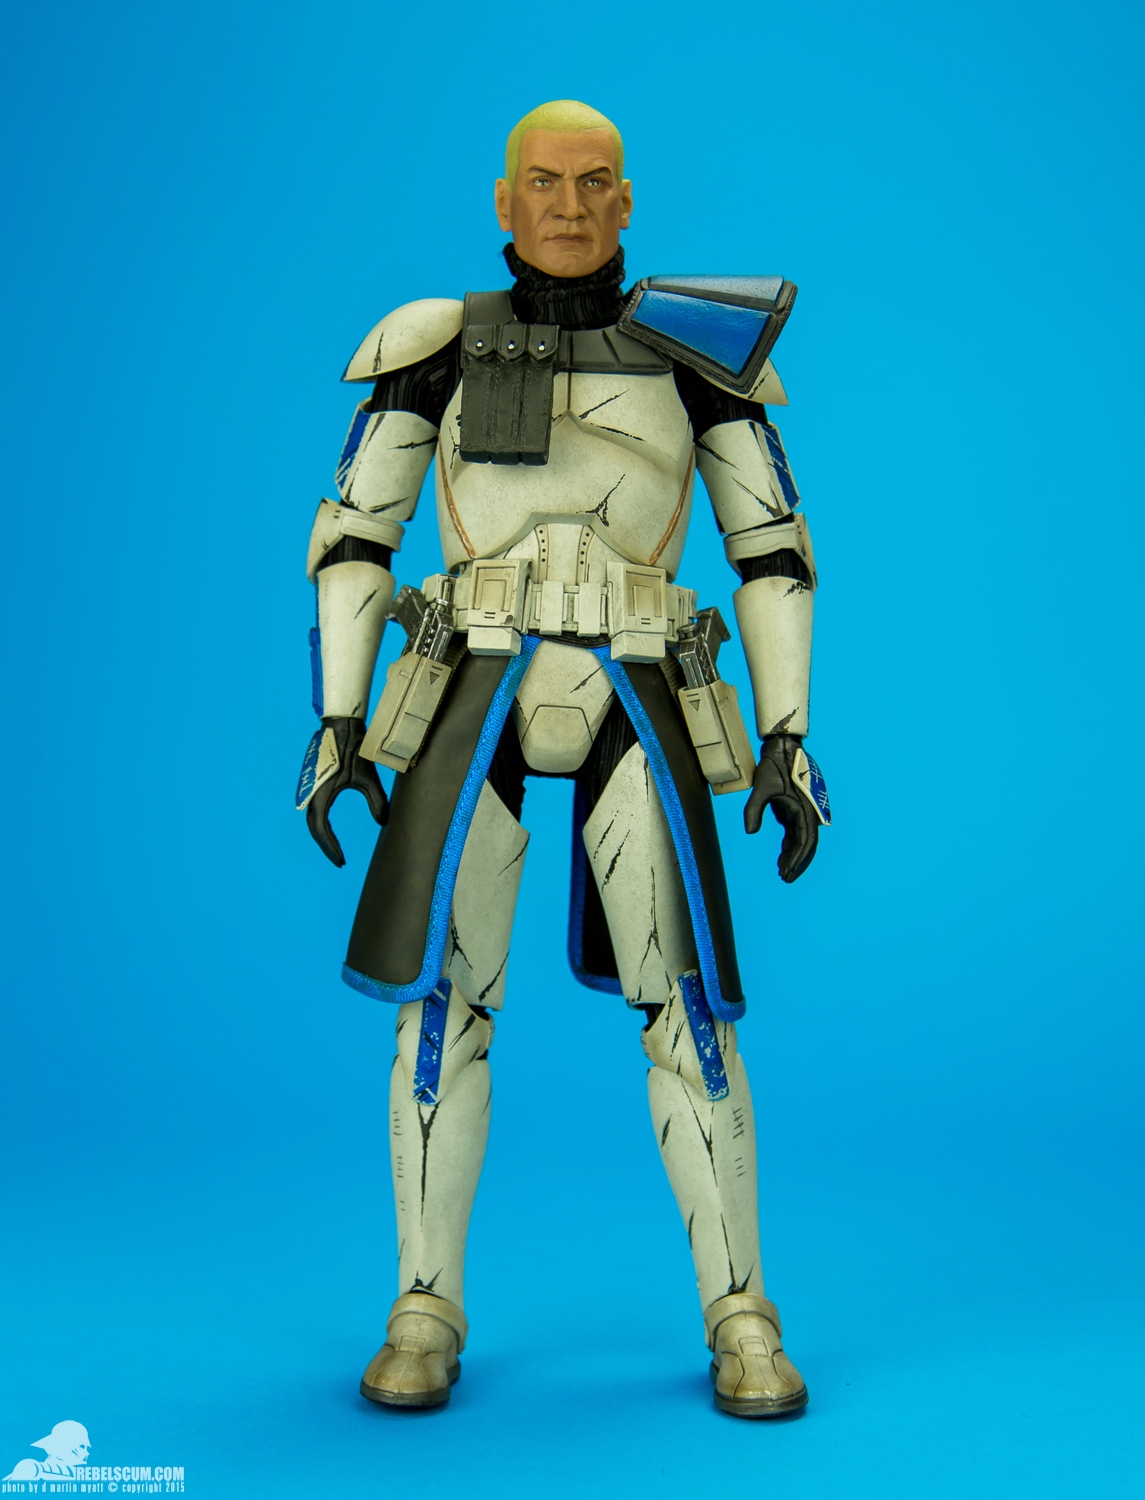 Captain-Rex-Phase-II-Sixth-Scale-Figure-Sideshow-Collectibles-001.jpg